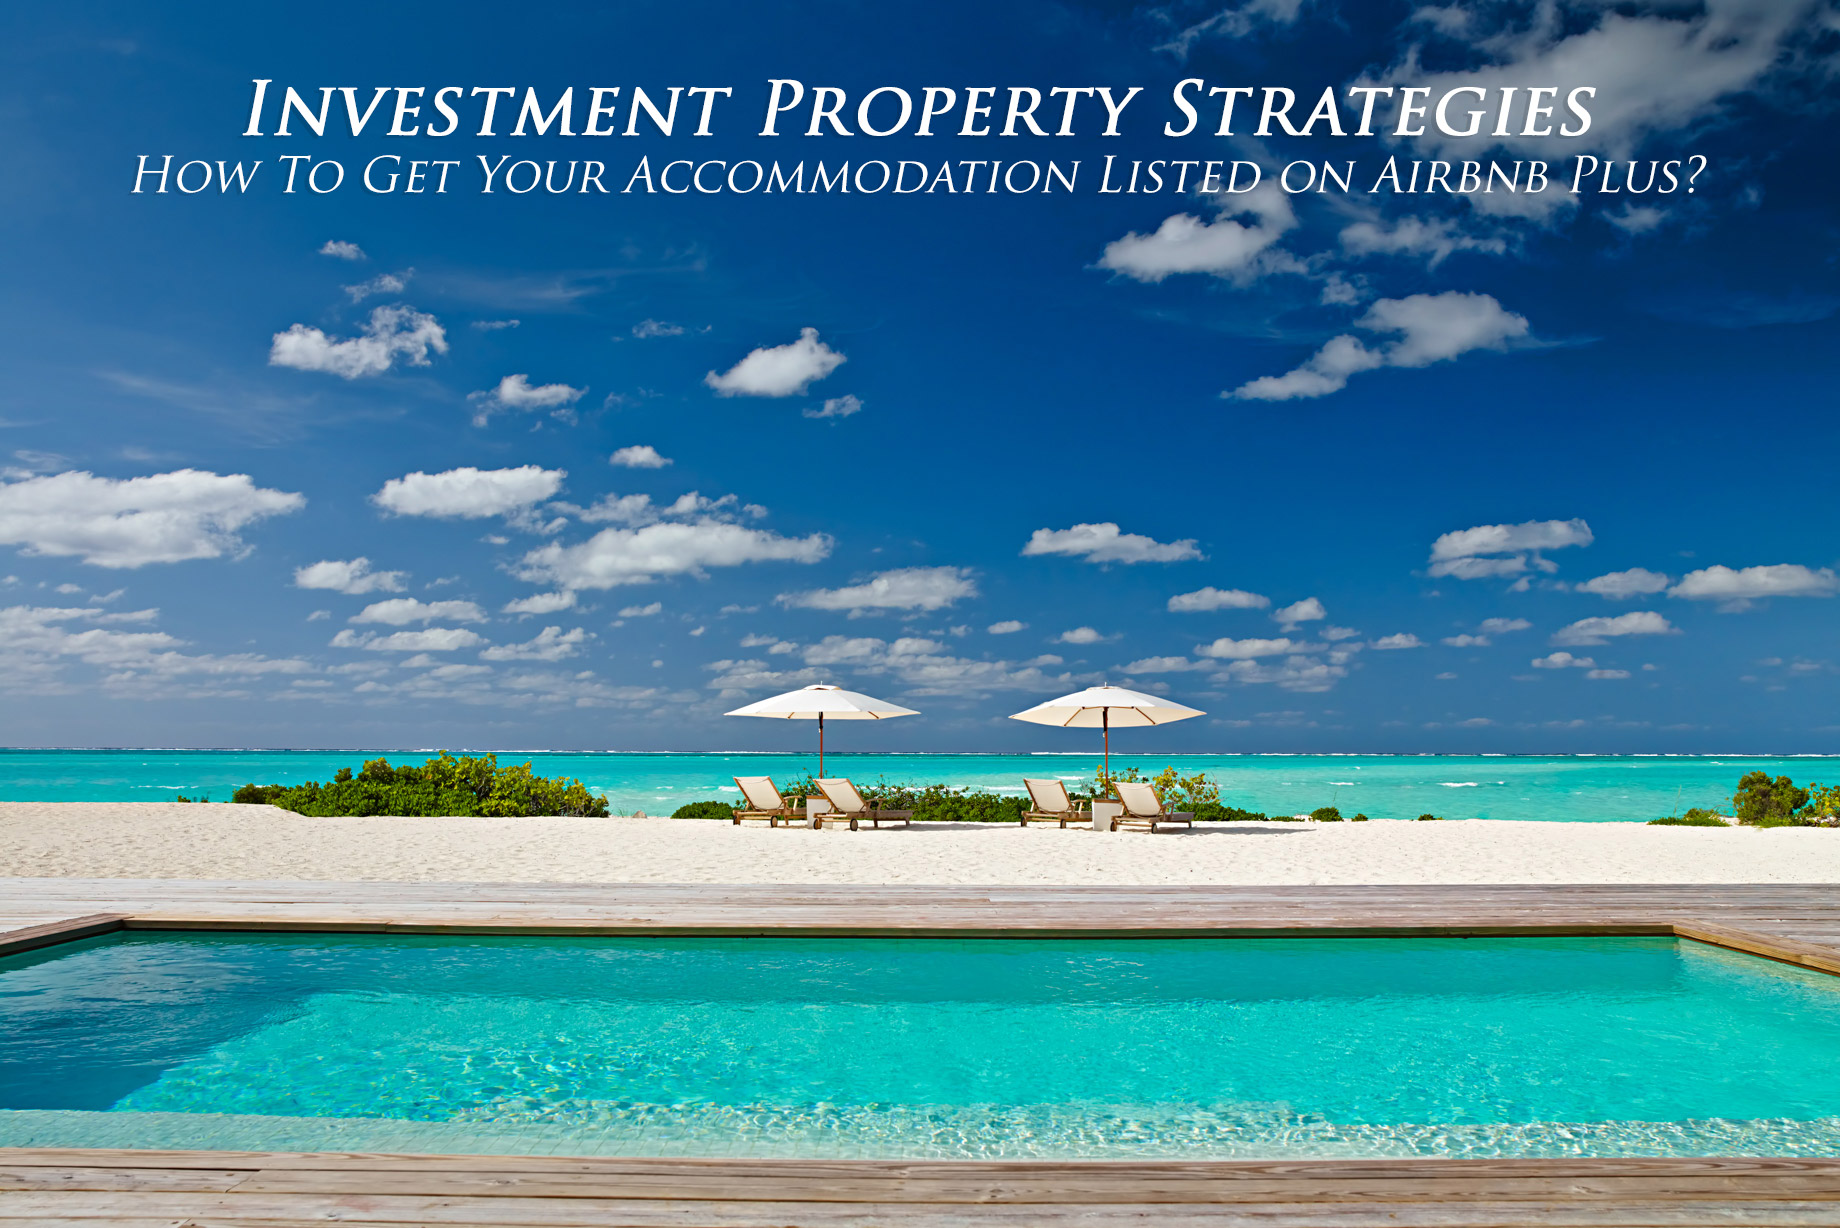 Investment Property Strategies – How To Get Your Accommodation Listed on Airbnb Plus?